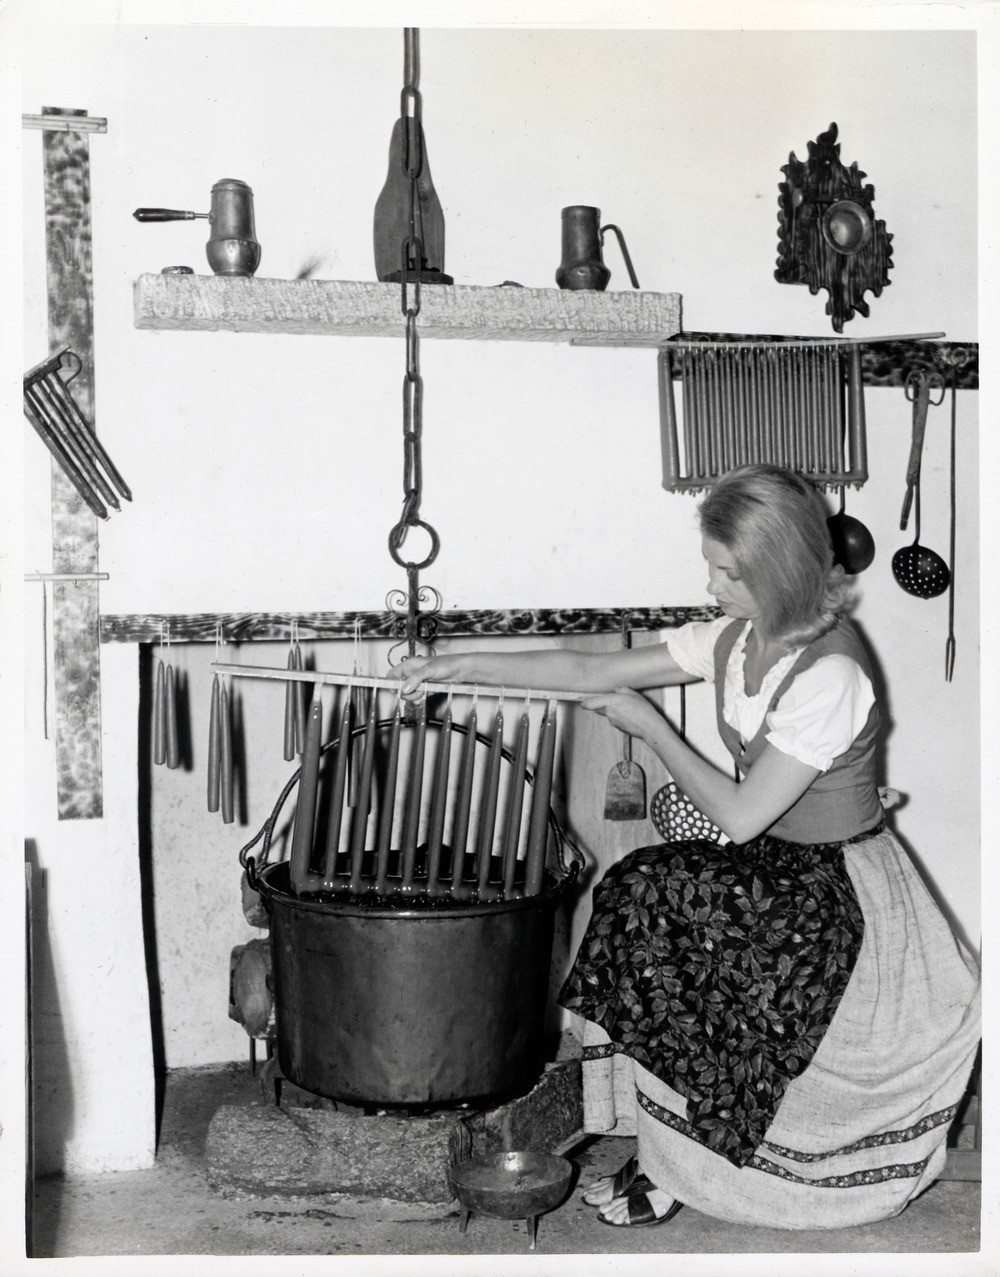 A promotional photograph showing a woman in period clothing dipping candles in Arrivas House - 